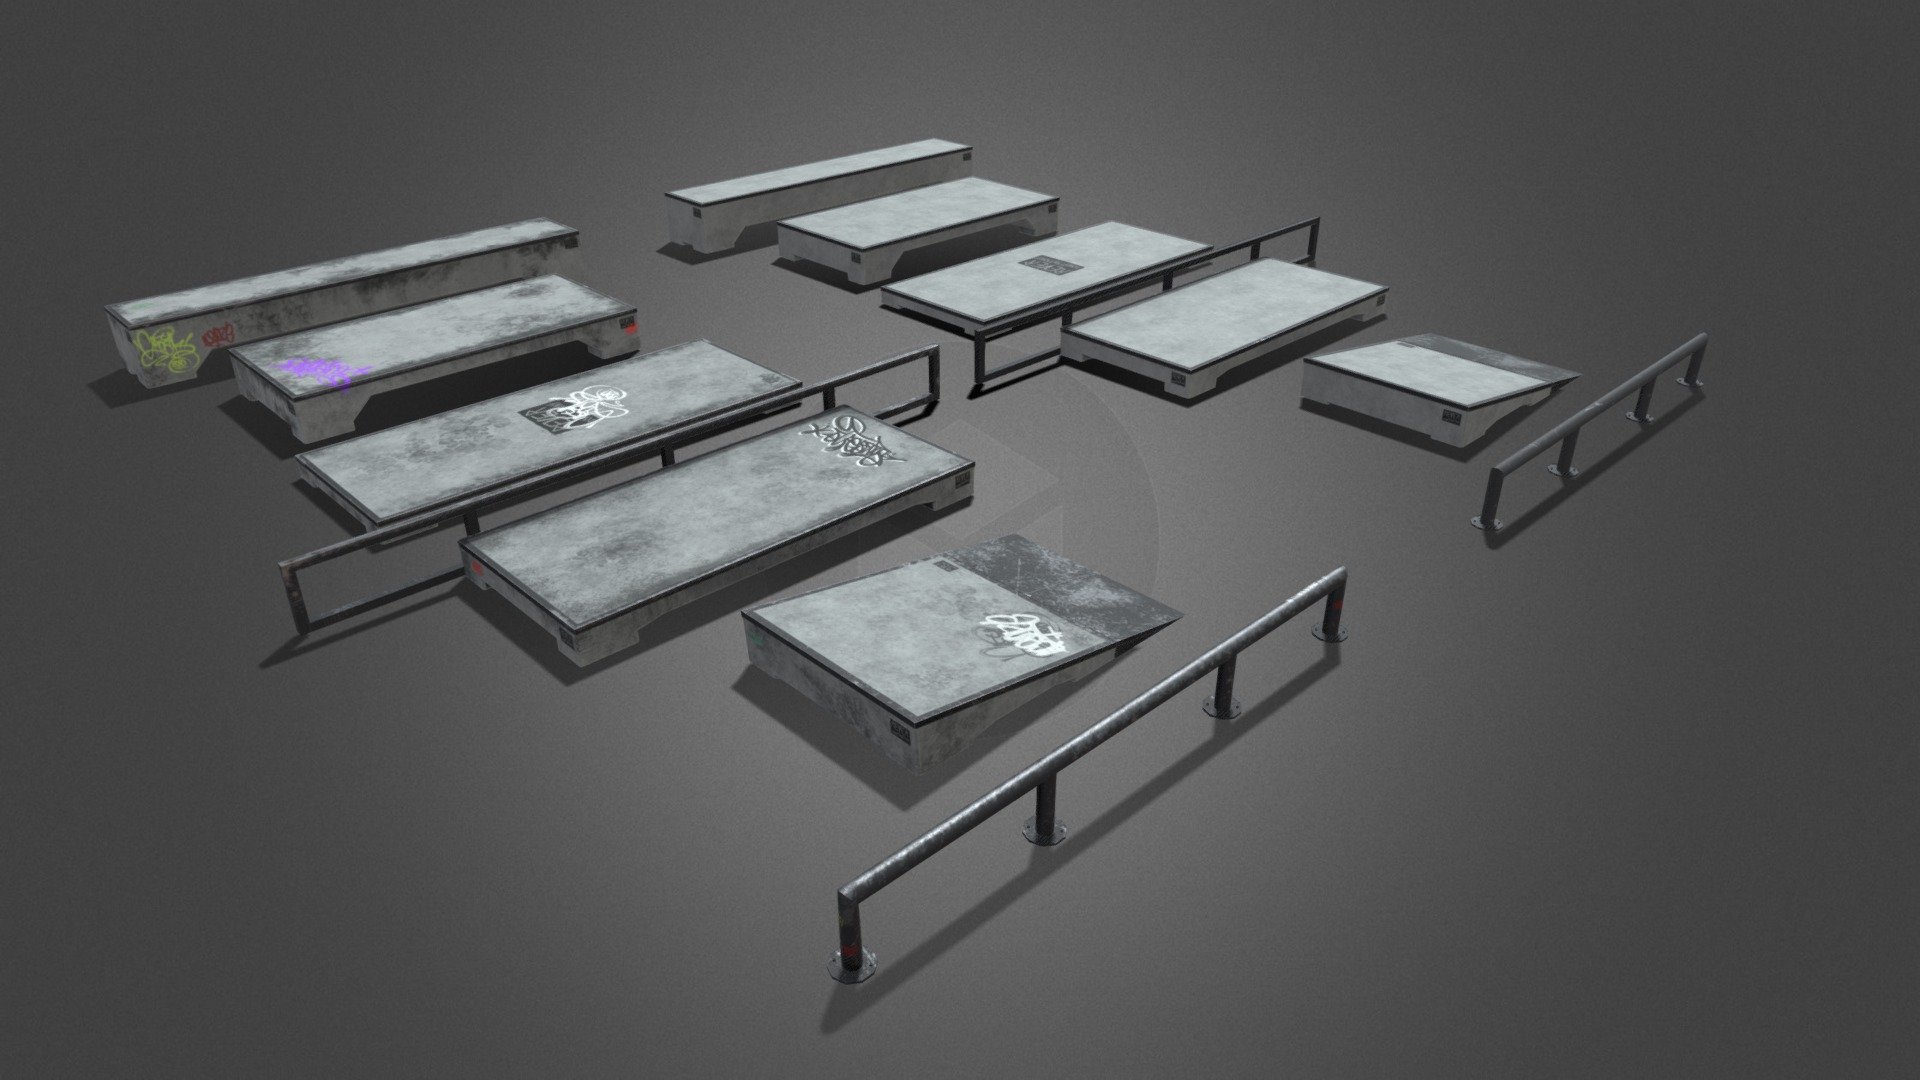 Skate Obstacles
- 2 texture sets : New and used
- Every obstacle has its own 2K texture set

Game ready assests
Moveable skate obstacles, you can set them as you like. Combine them etc 3d model